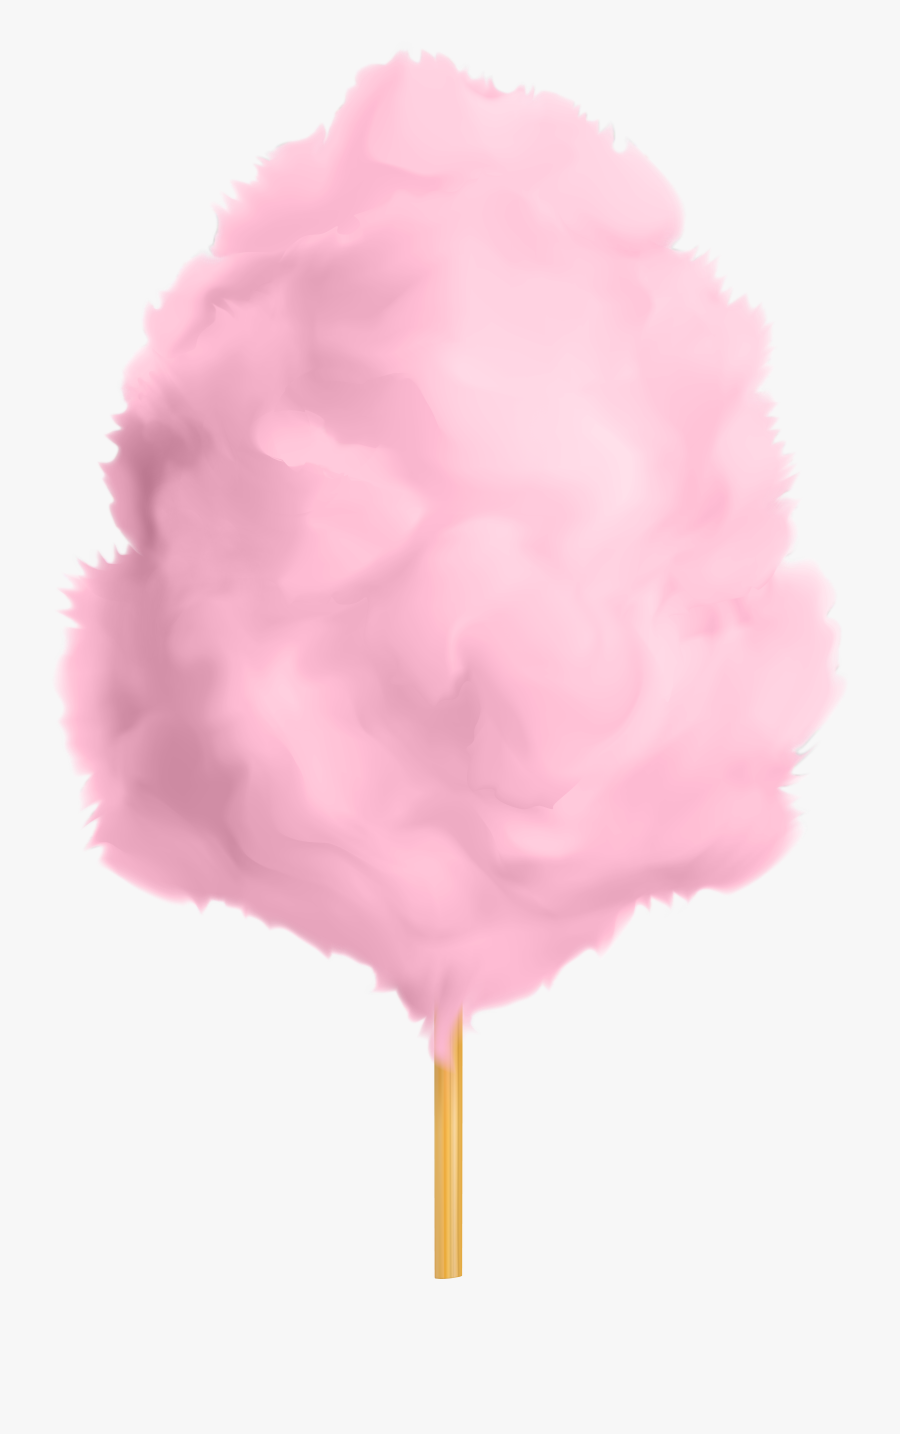 Cotton Candy Png Clip Art Imageu200b Gallery Yopriceville - Pink Cotton Candy Png, Transparent Clipart